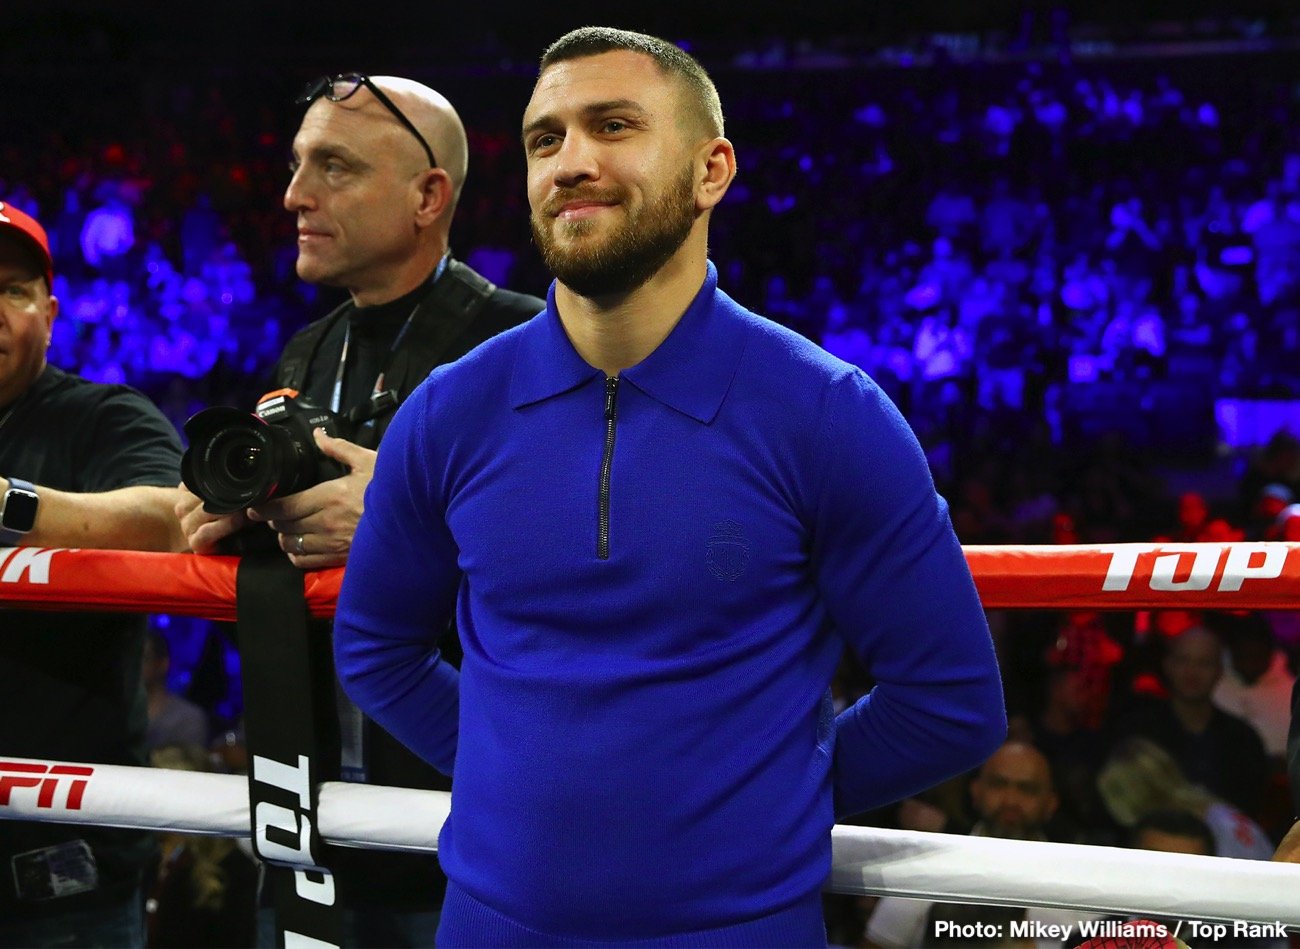 Image: Lomachenko: Teofimo making a mistake if he tries to Bully him